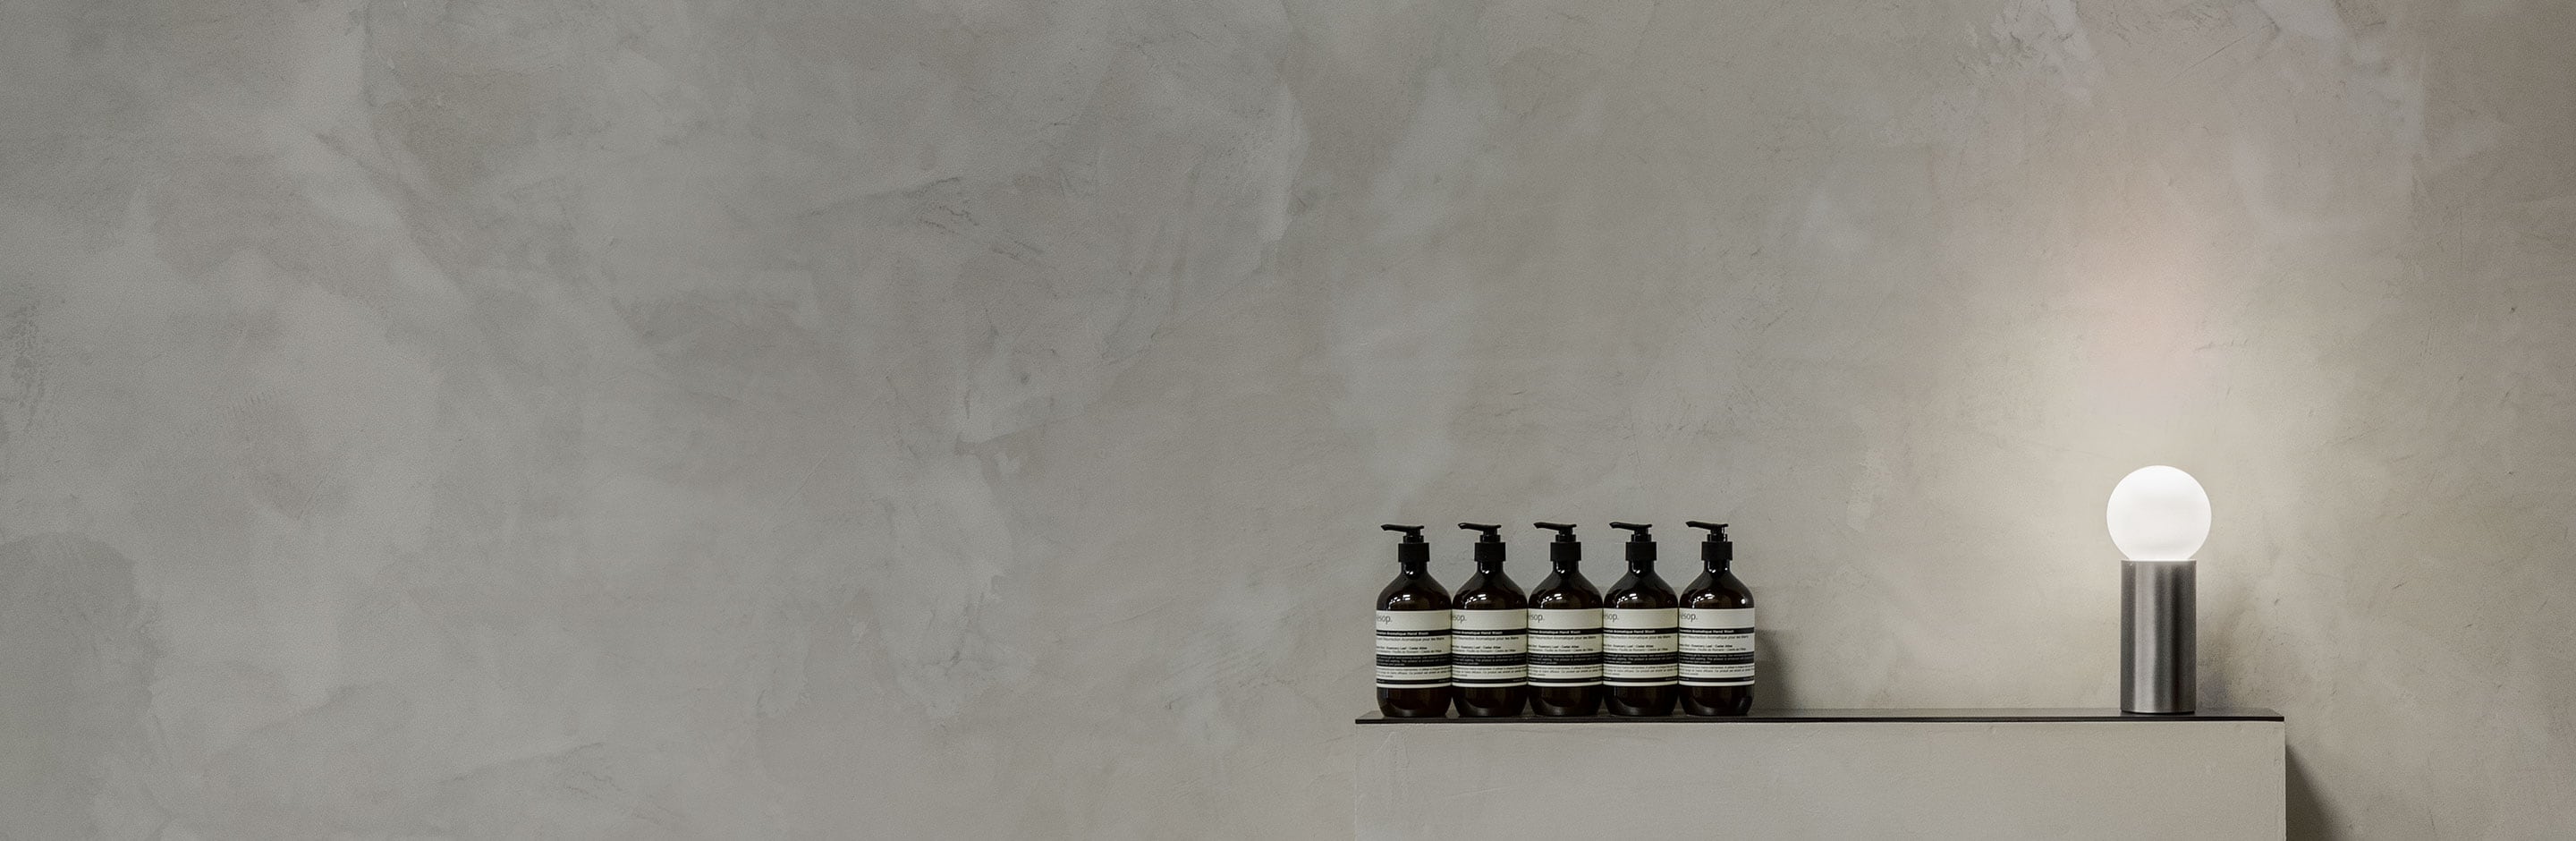 Image of Aesop products displayed along a grey wall